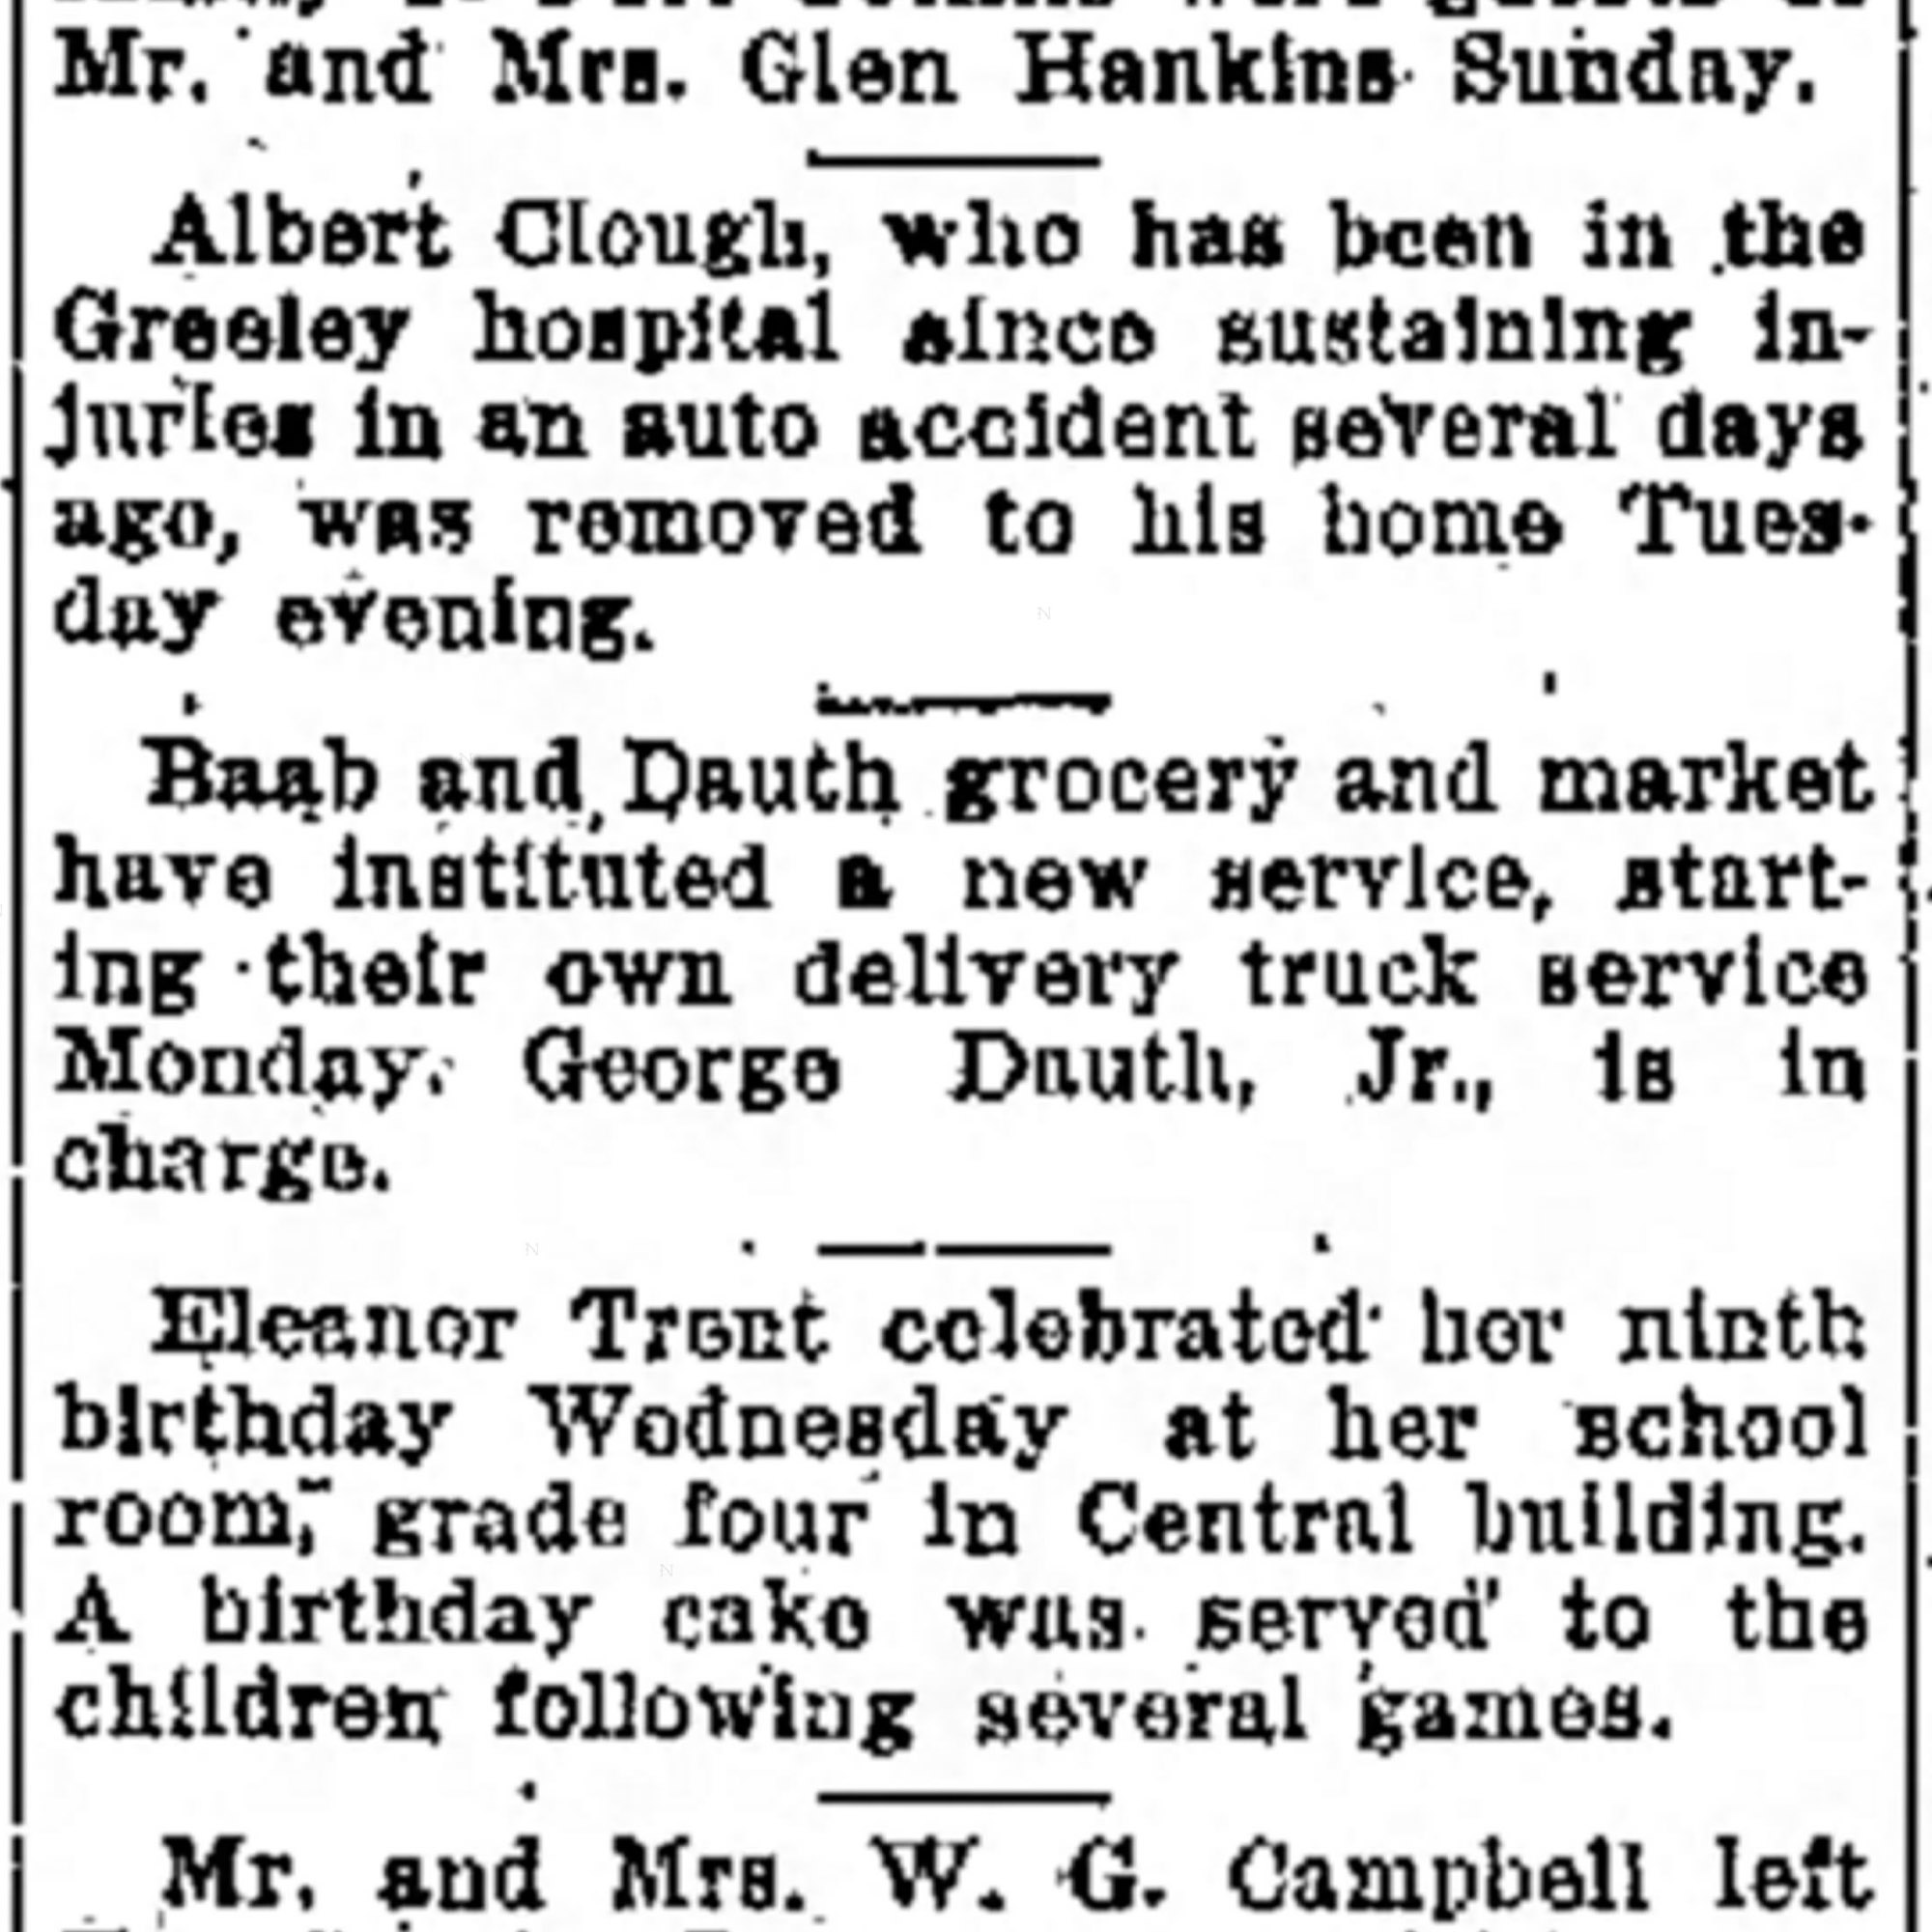 Dauth Family Archive - 1932-02-17 - Greeley Daily Tribune - June Dauth Delivery Service